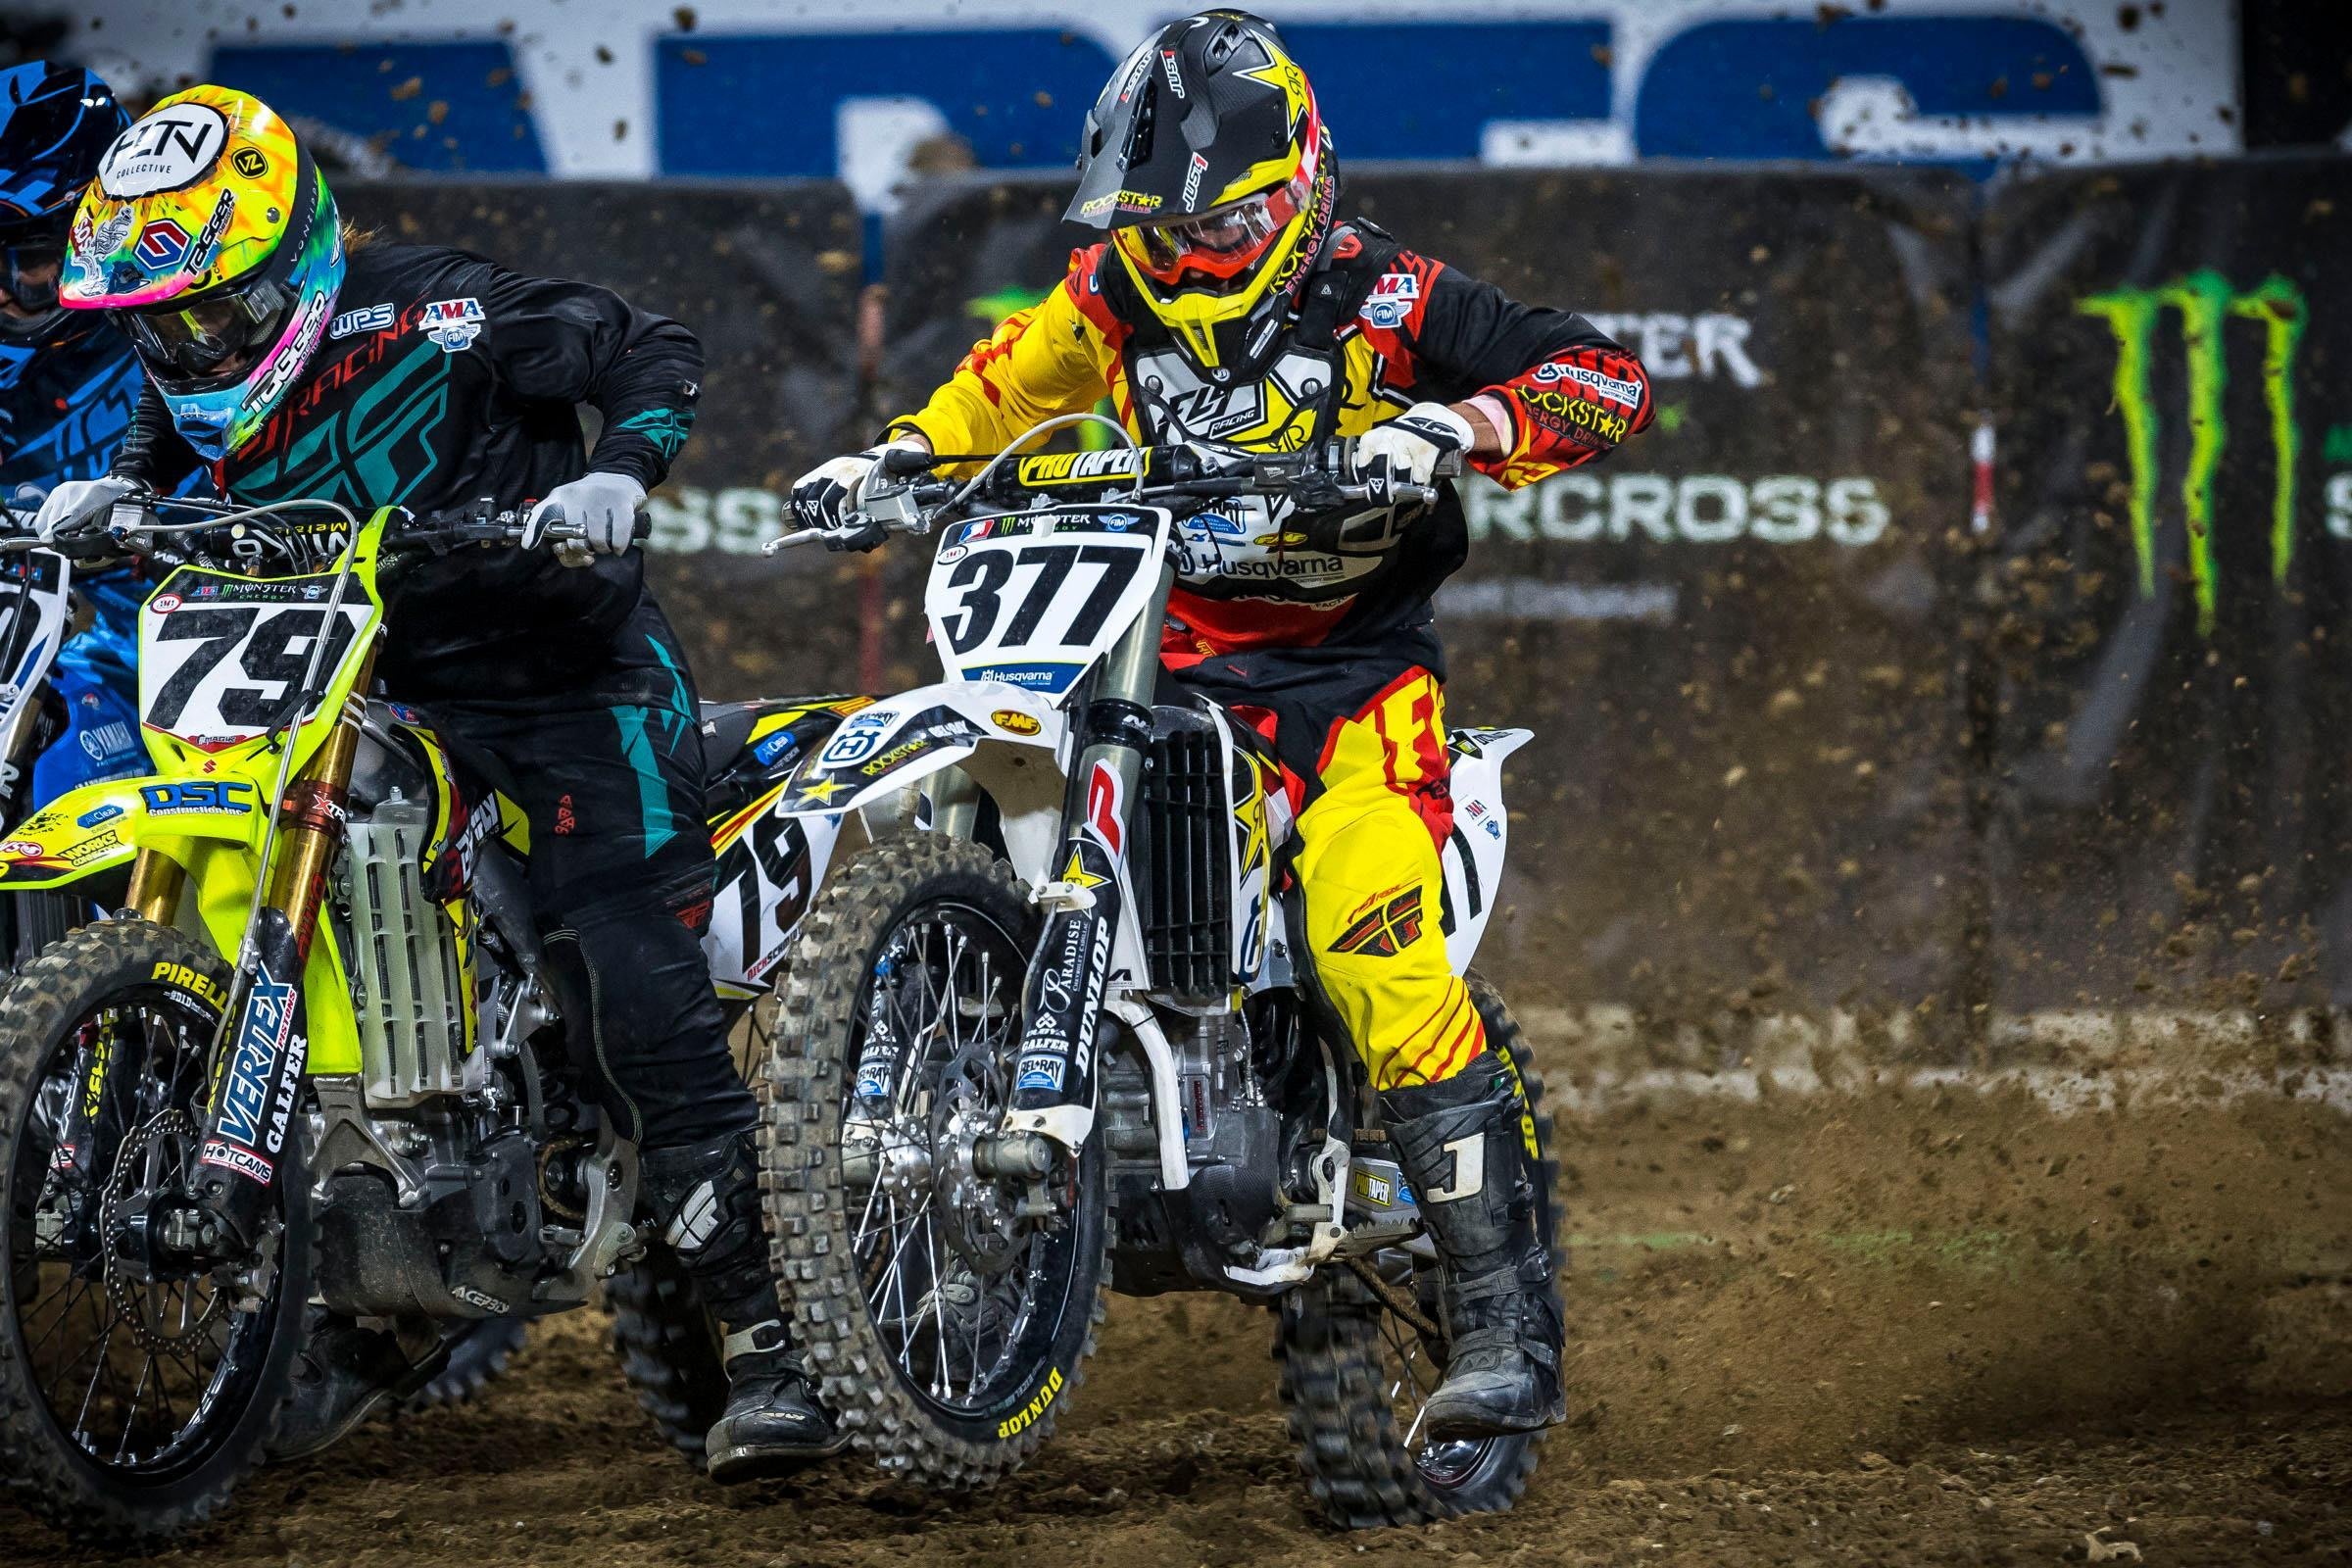 8 Photos of Supercross Riders Doing What They Do Best